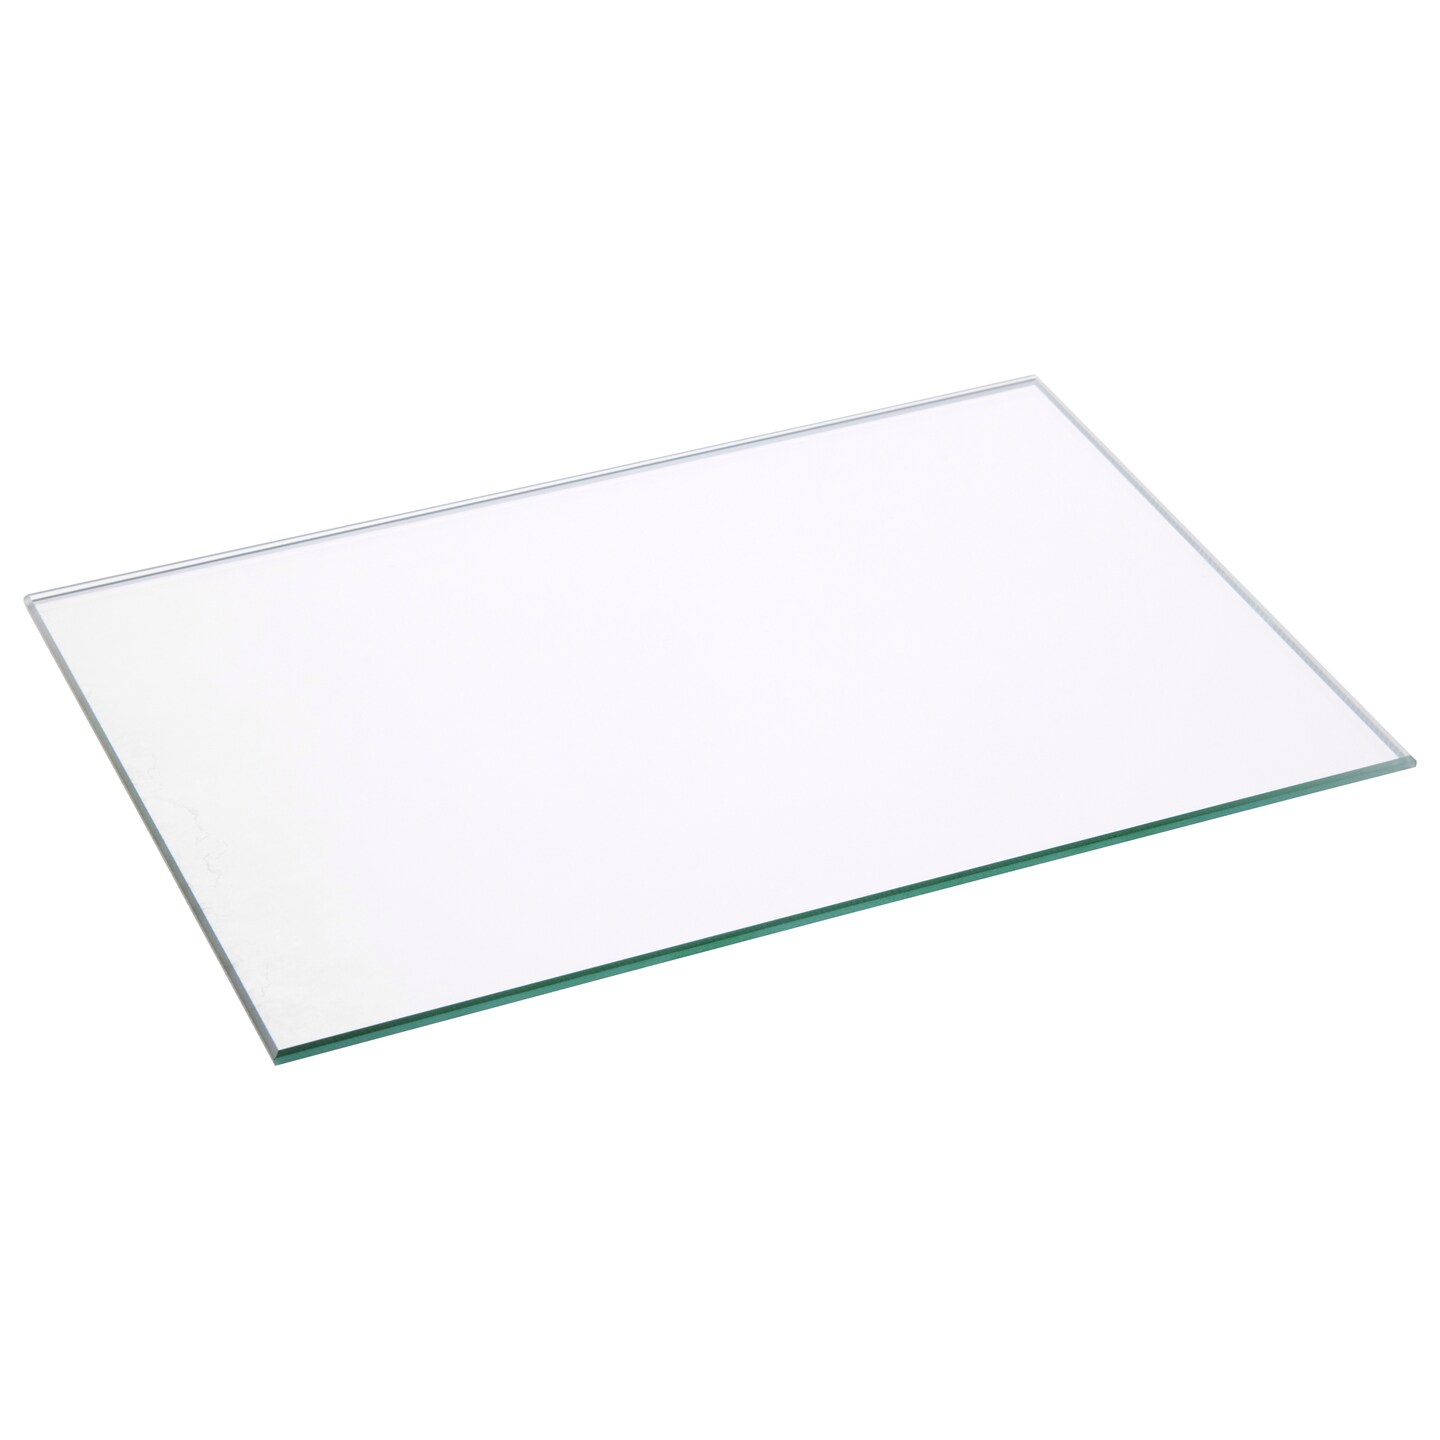 Plymor Rectangle 3mm Non-Beveled Glass Mirror, 5 inch x 7 inch